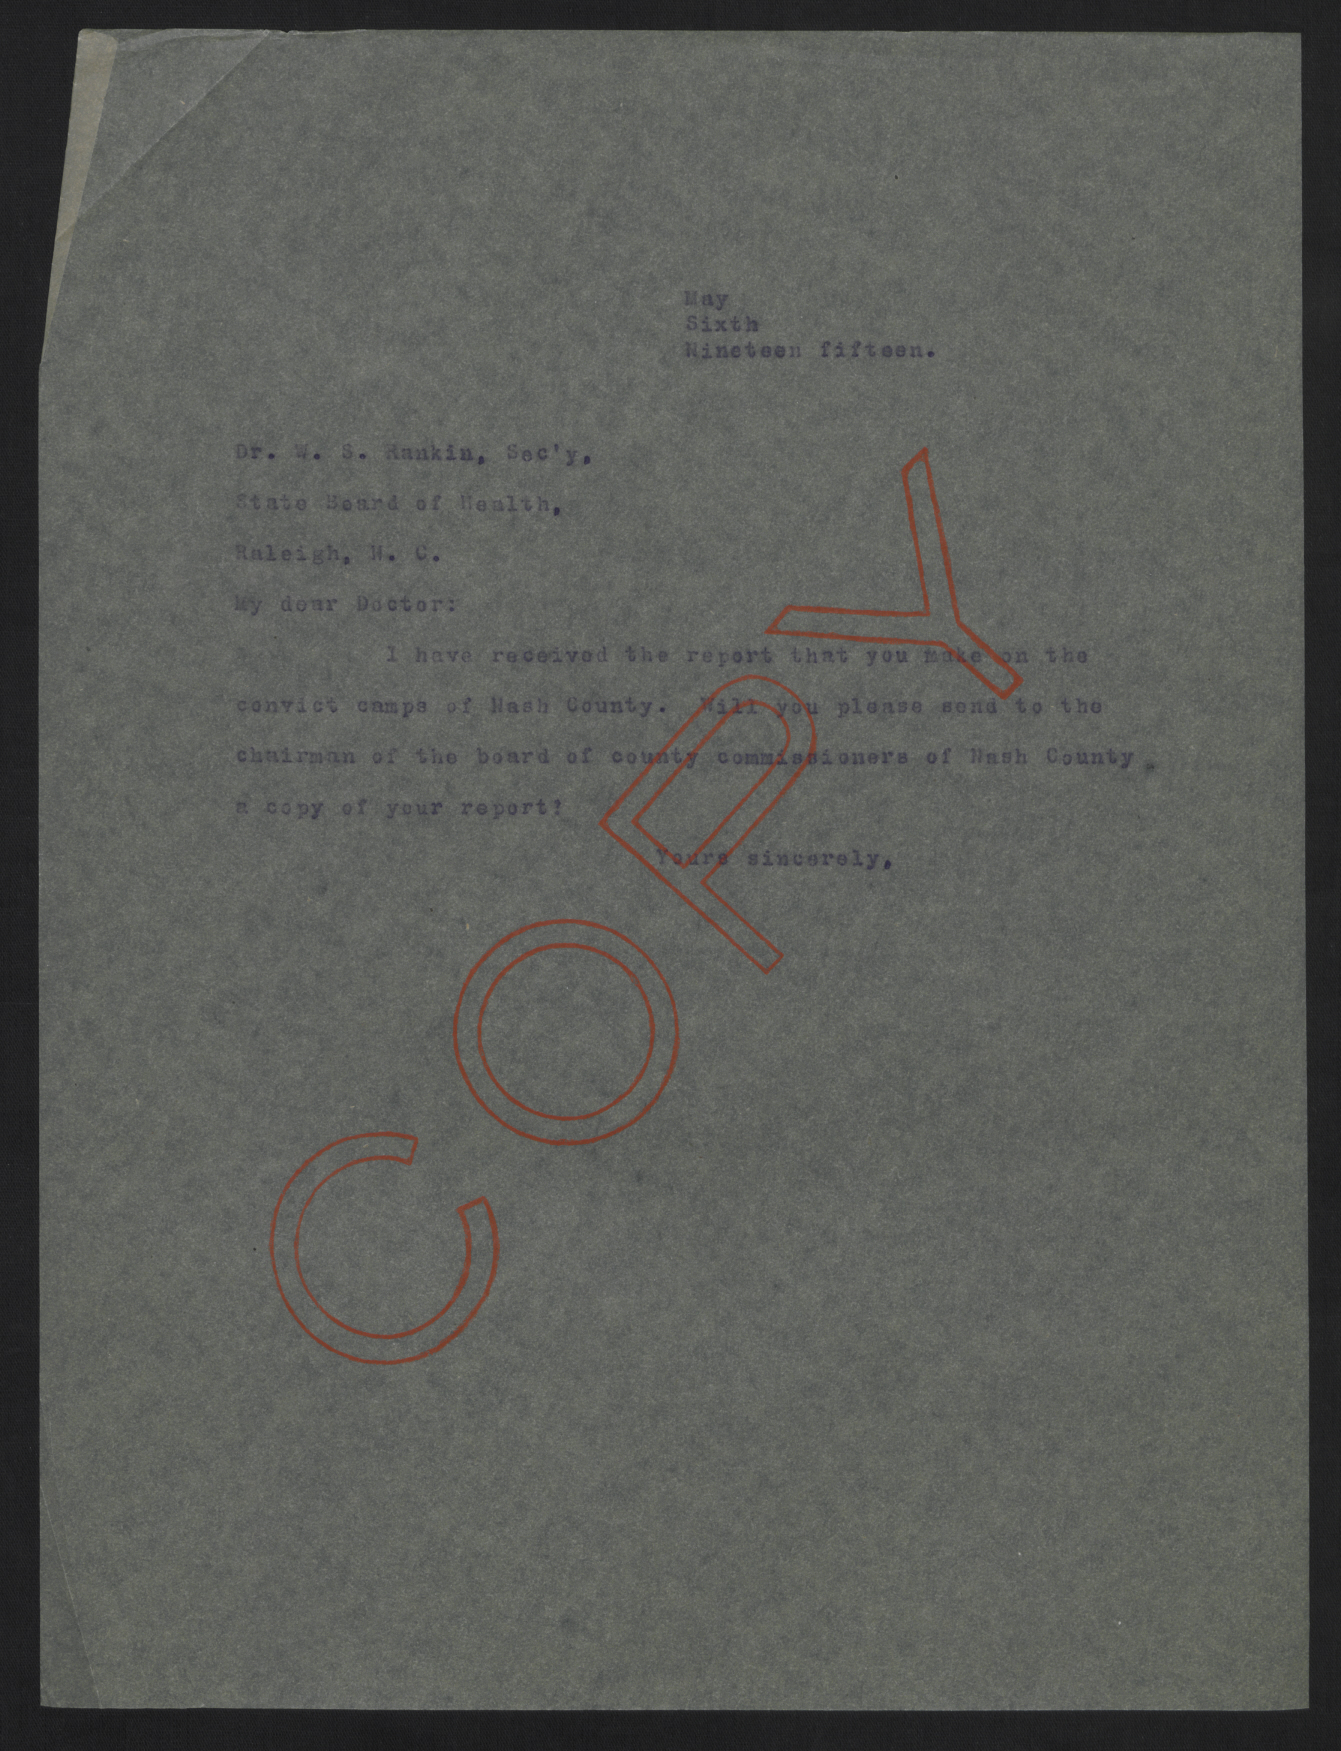 Letter from Craig to Rankin, May 6, 1915